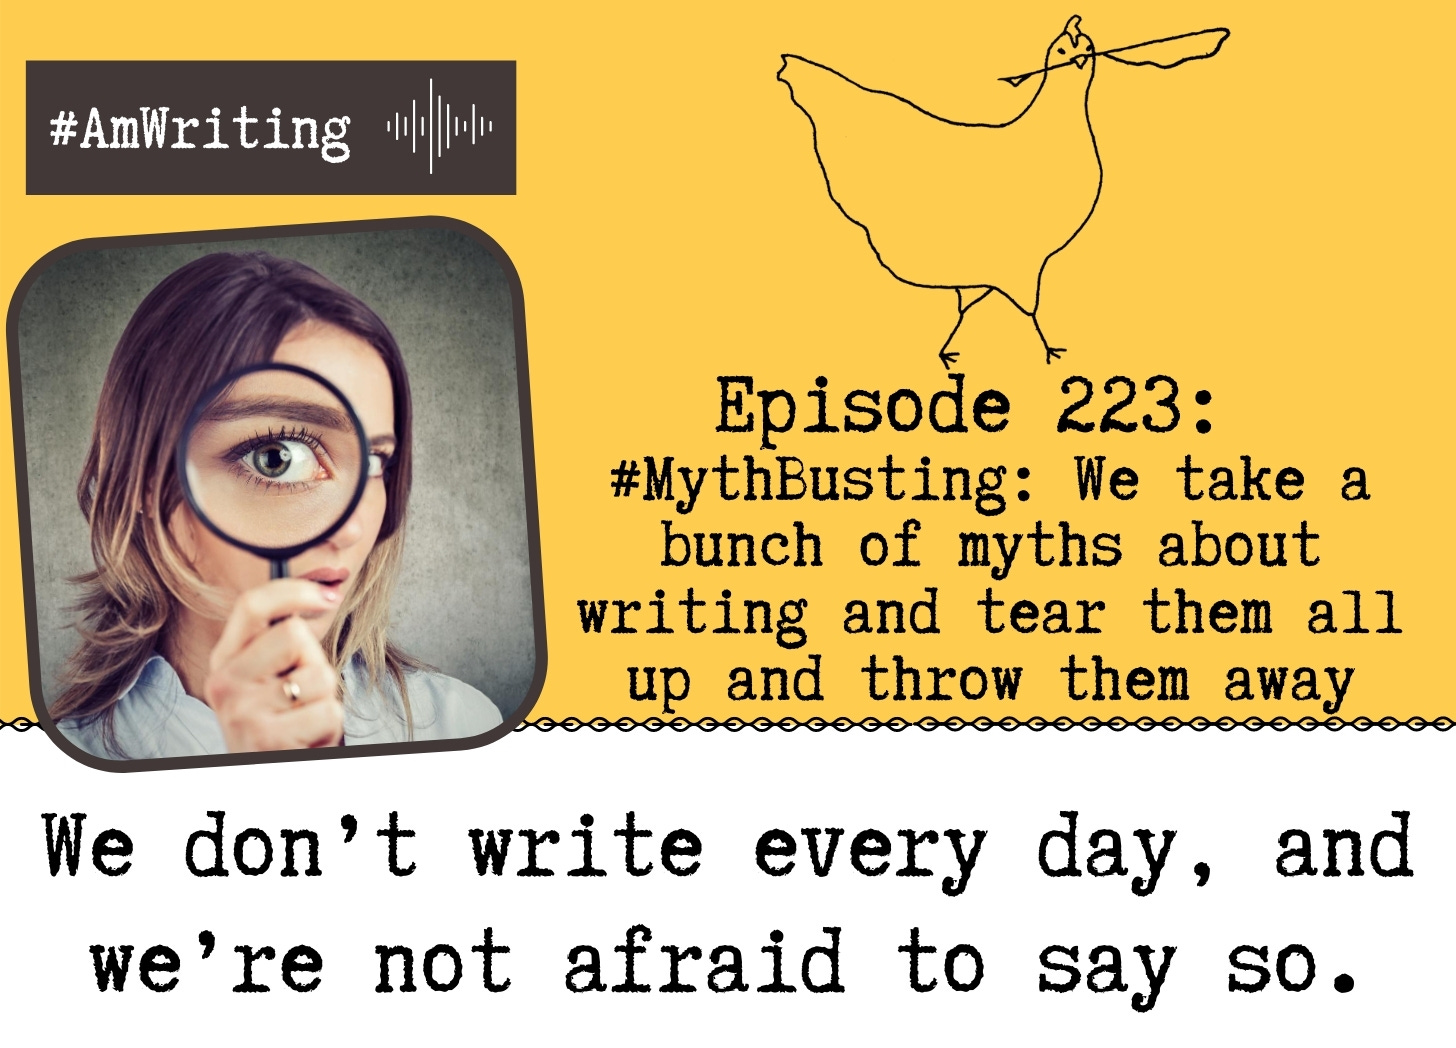 Episode 223 #MythBusting We take a bunch of myths about writing and tear them all up and throw them away